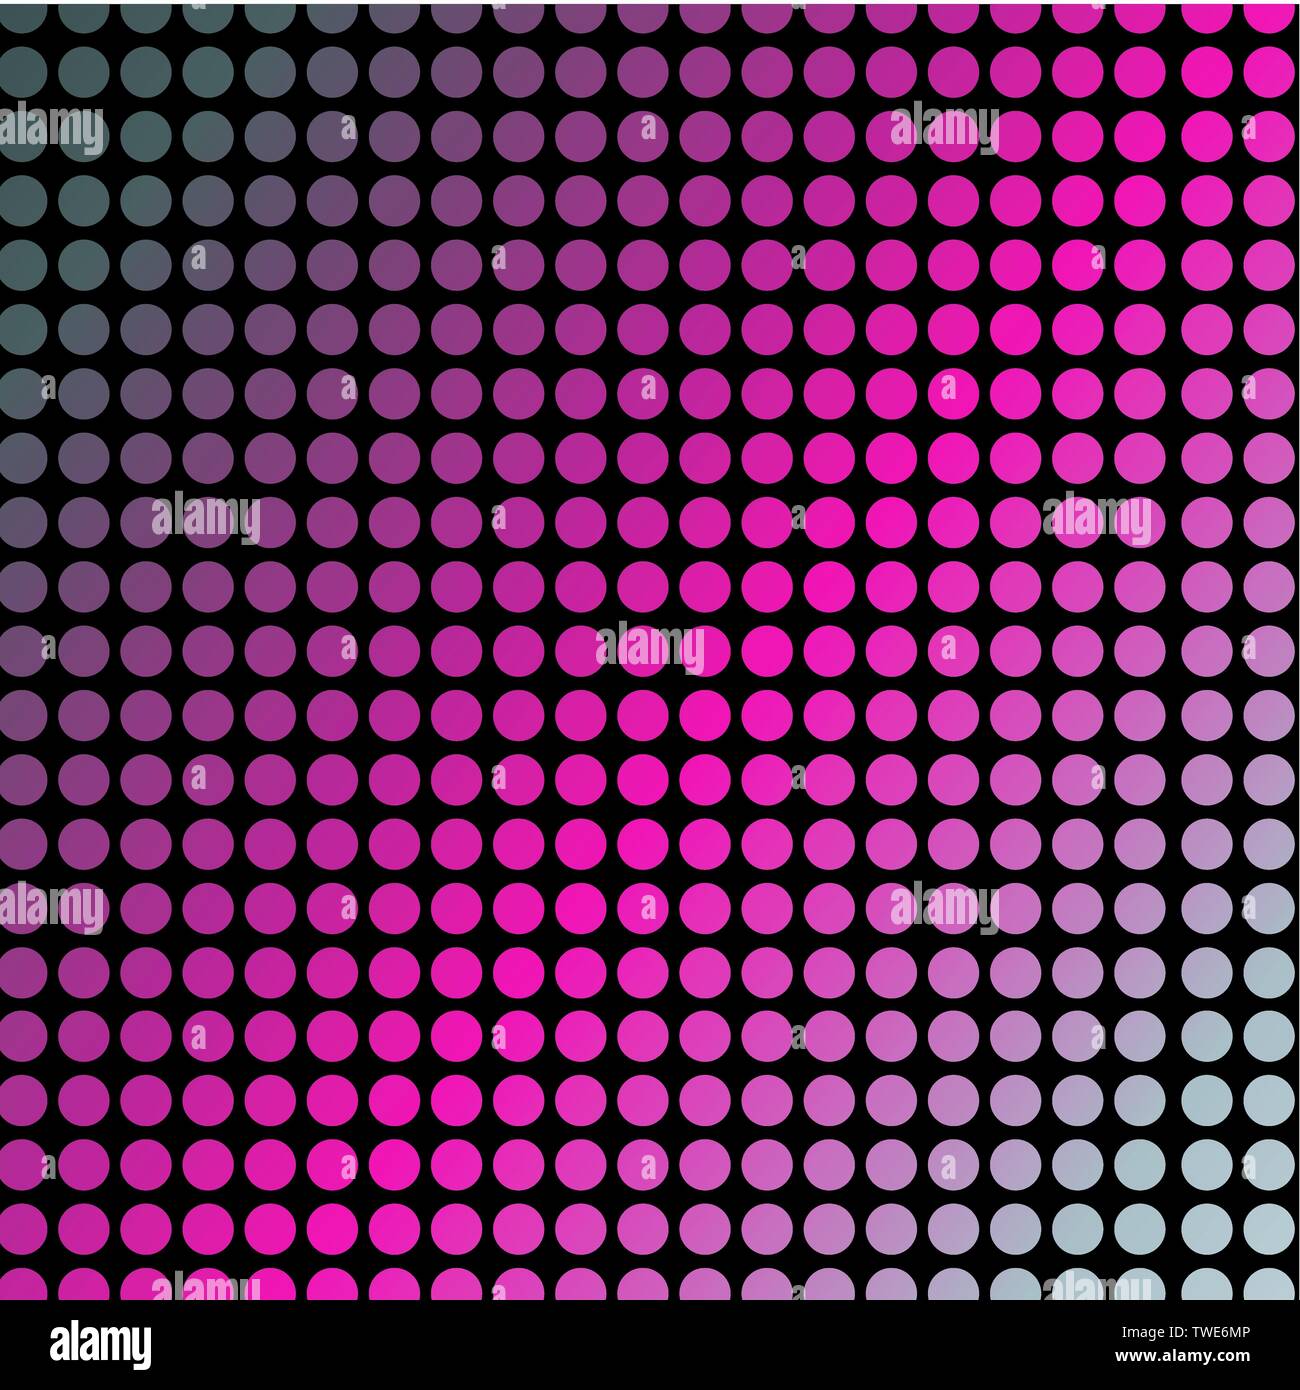 Hot pink color Stock Vector Images - Alamy